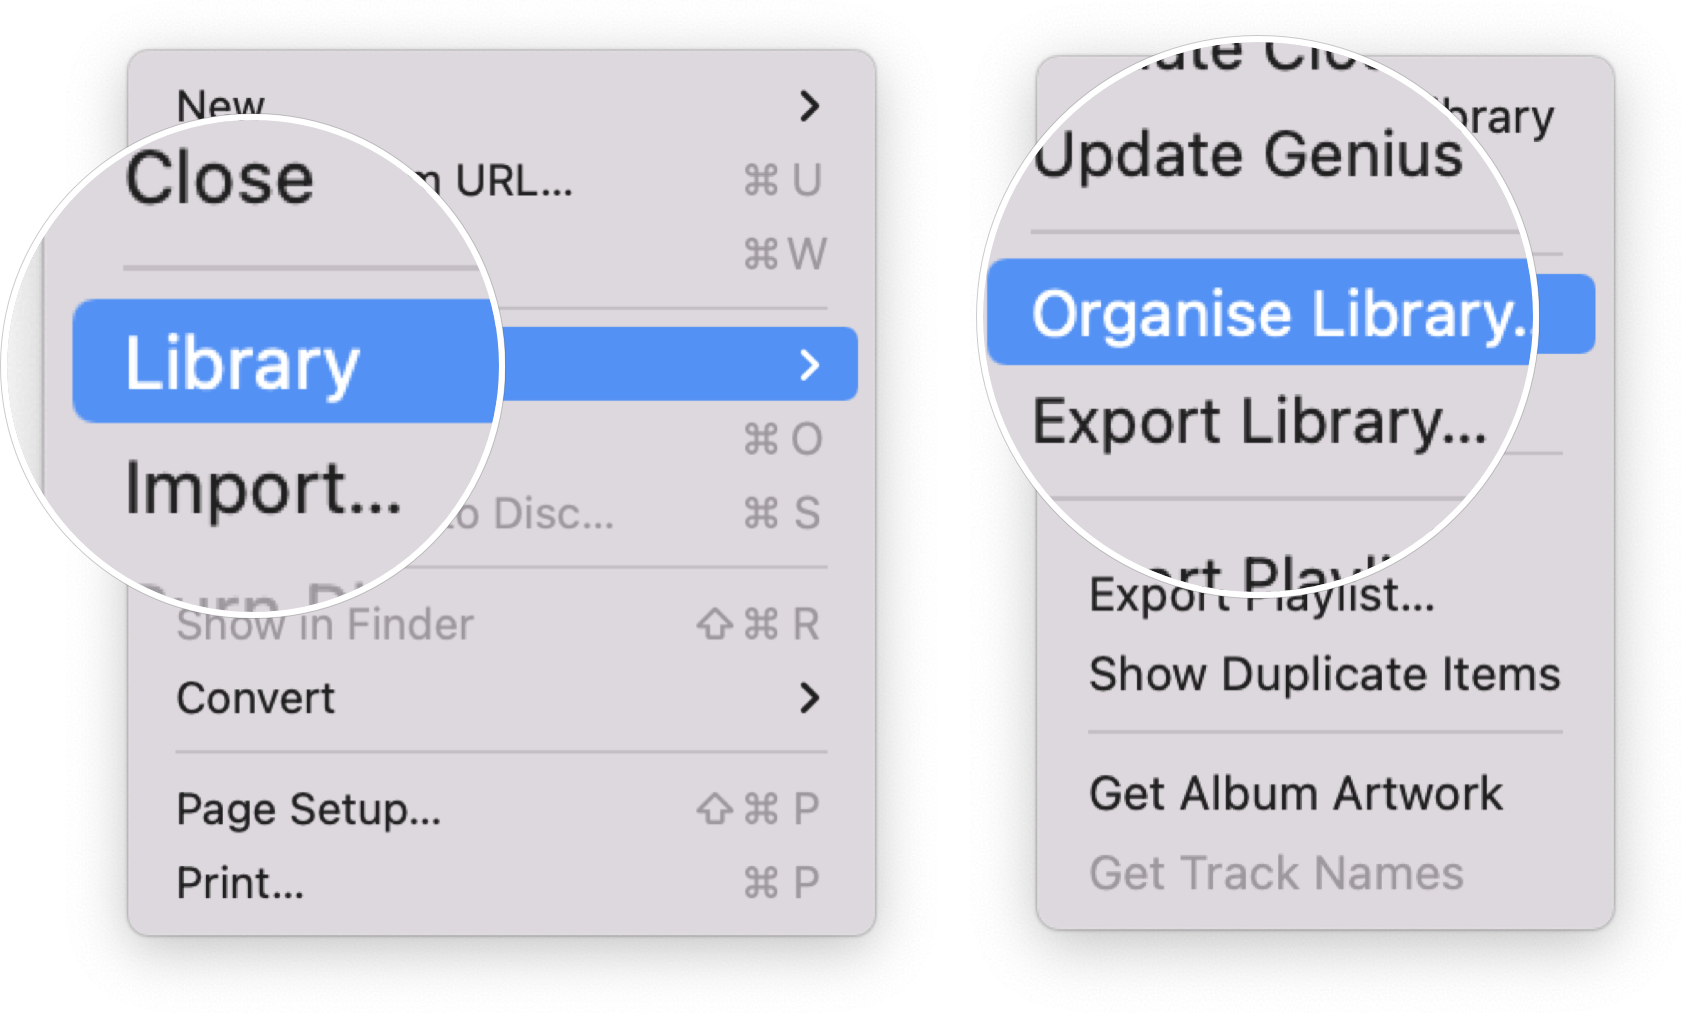 Consolidate your music library by showing: Hover over the Library under File, click Organize Library